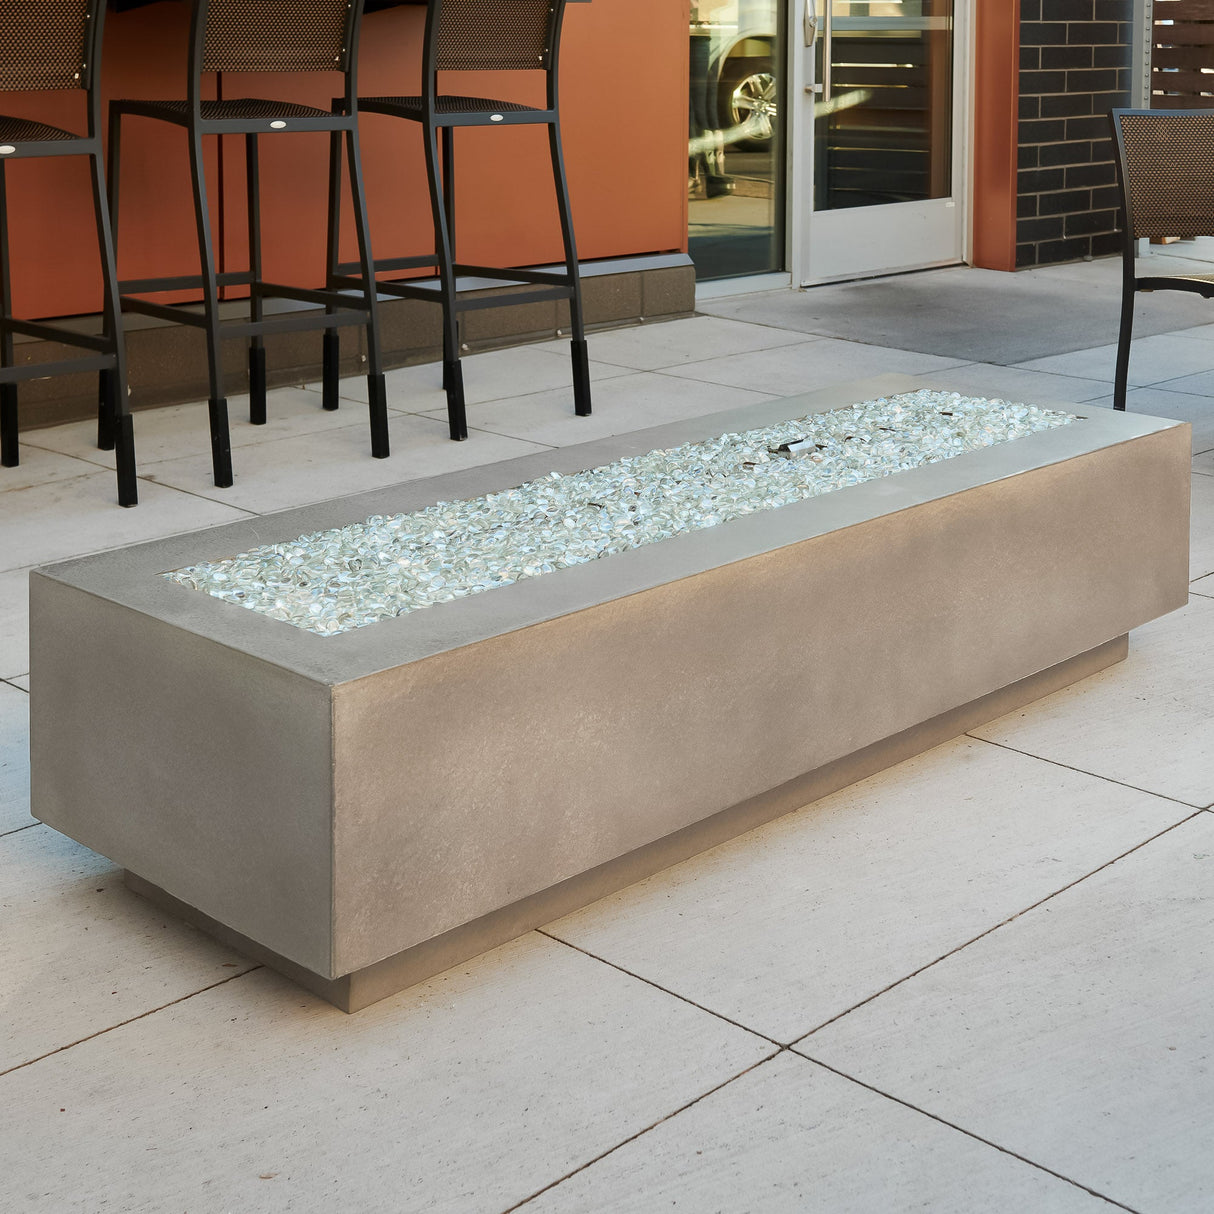 Fire media placed on the burner of a Natural Grey Cove Linear Gas Fire Pit Table 72"